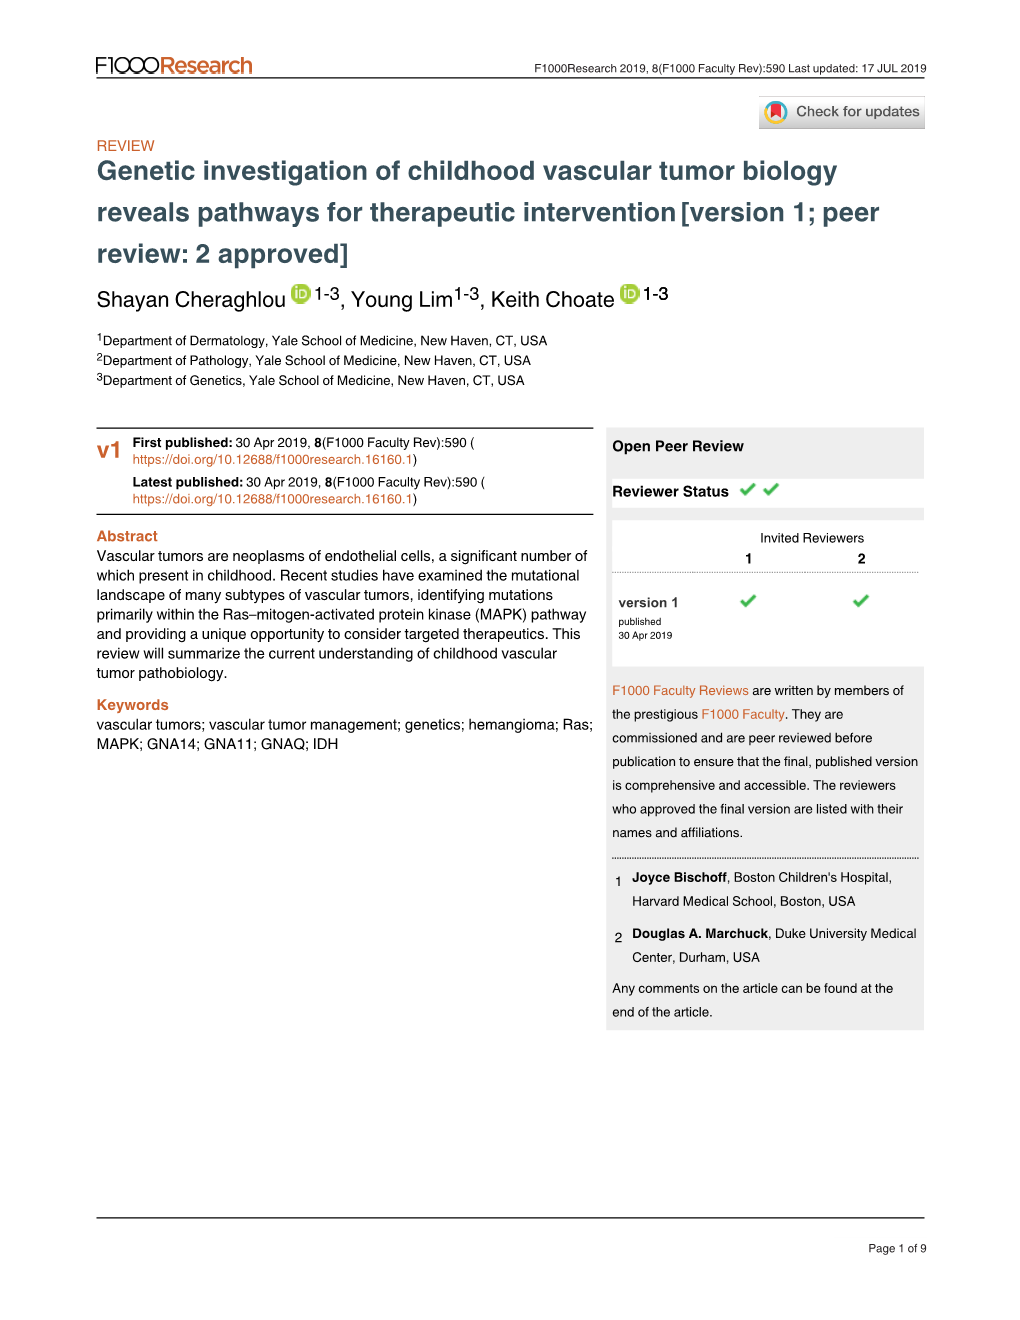 Genetic Investigation of Childhood Vascular Tumor Biology Reveals Pathways for Therapeutic Intervention[Version 1; Peer Review